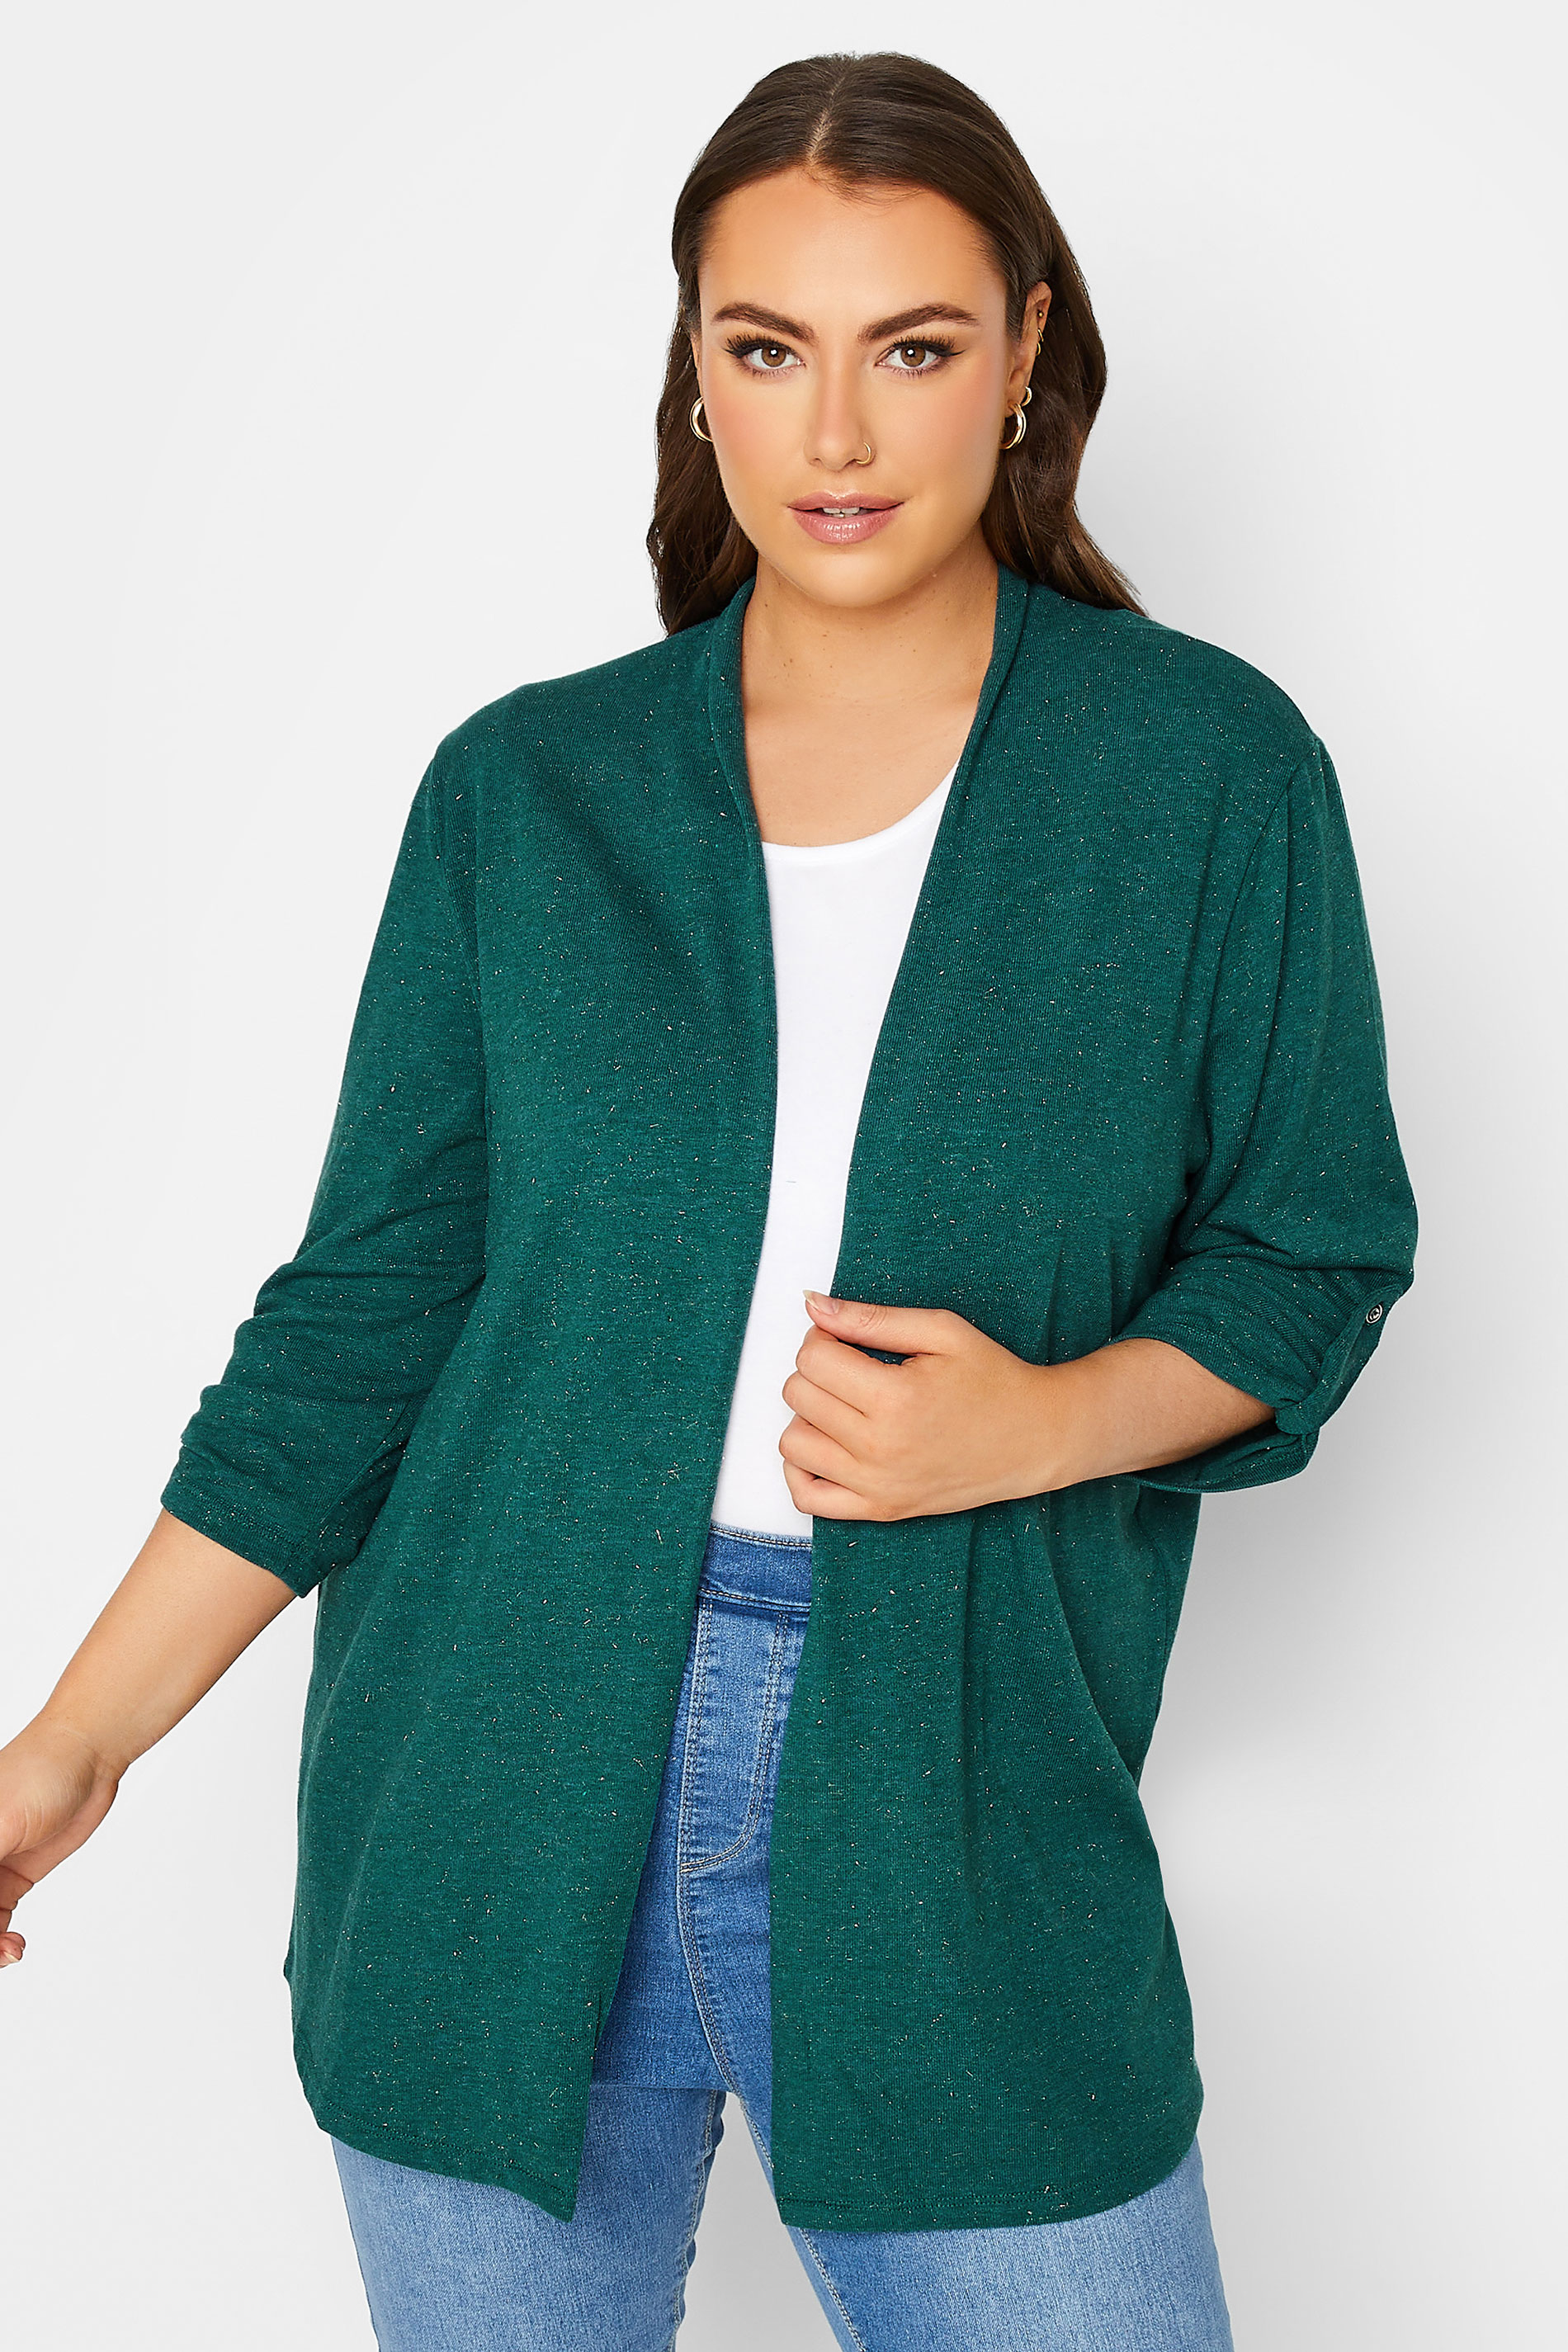 YOURS LUXURY Plus Size Teal Green Metallic Cardigan | Yours Clothing 1